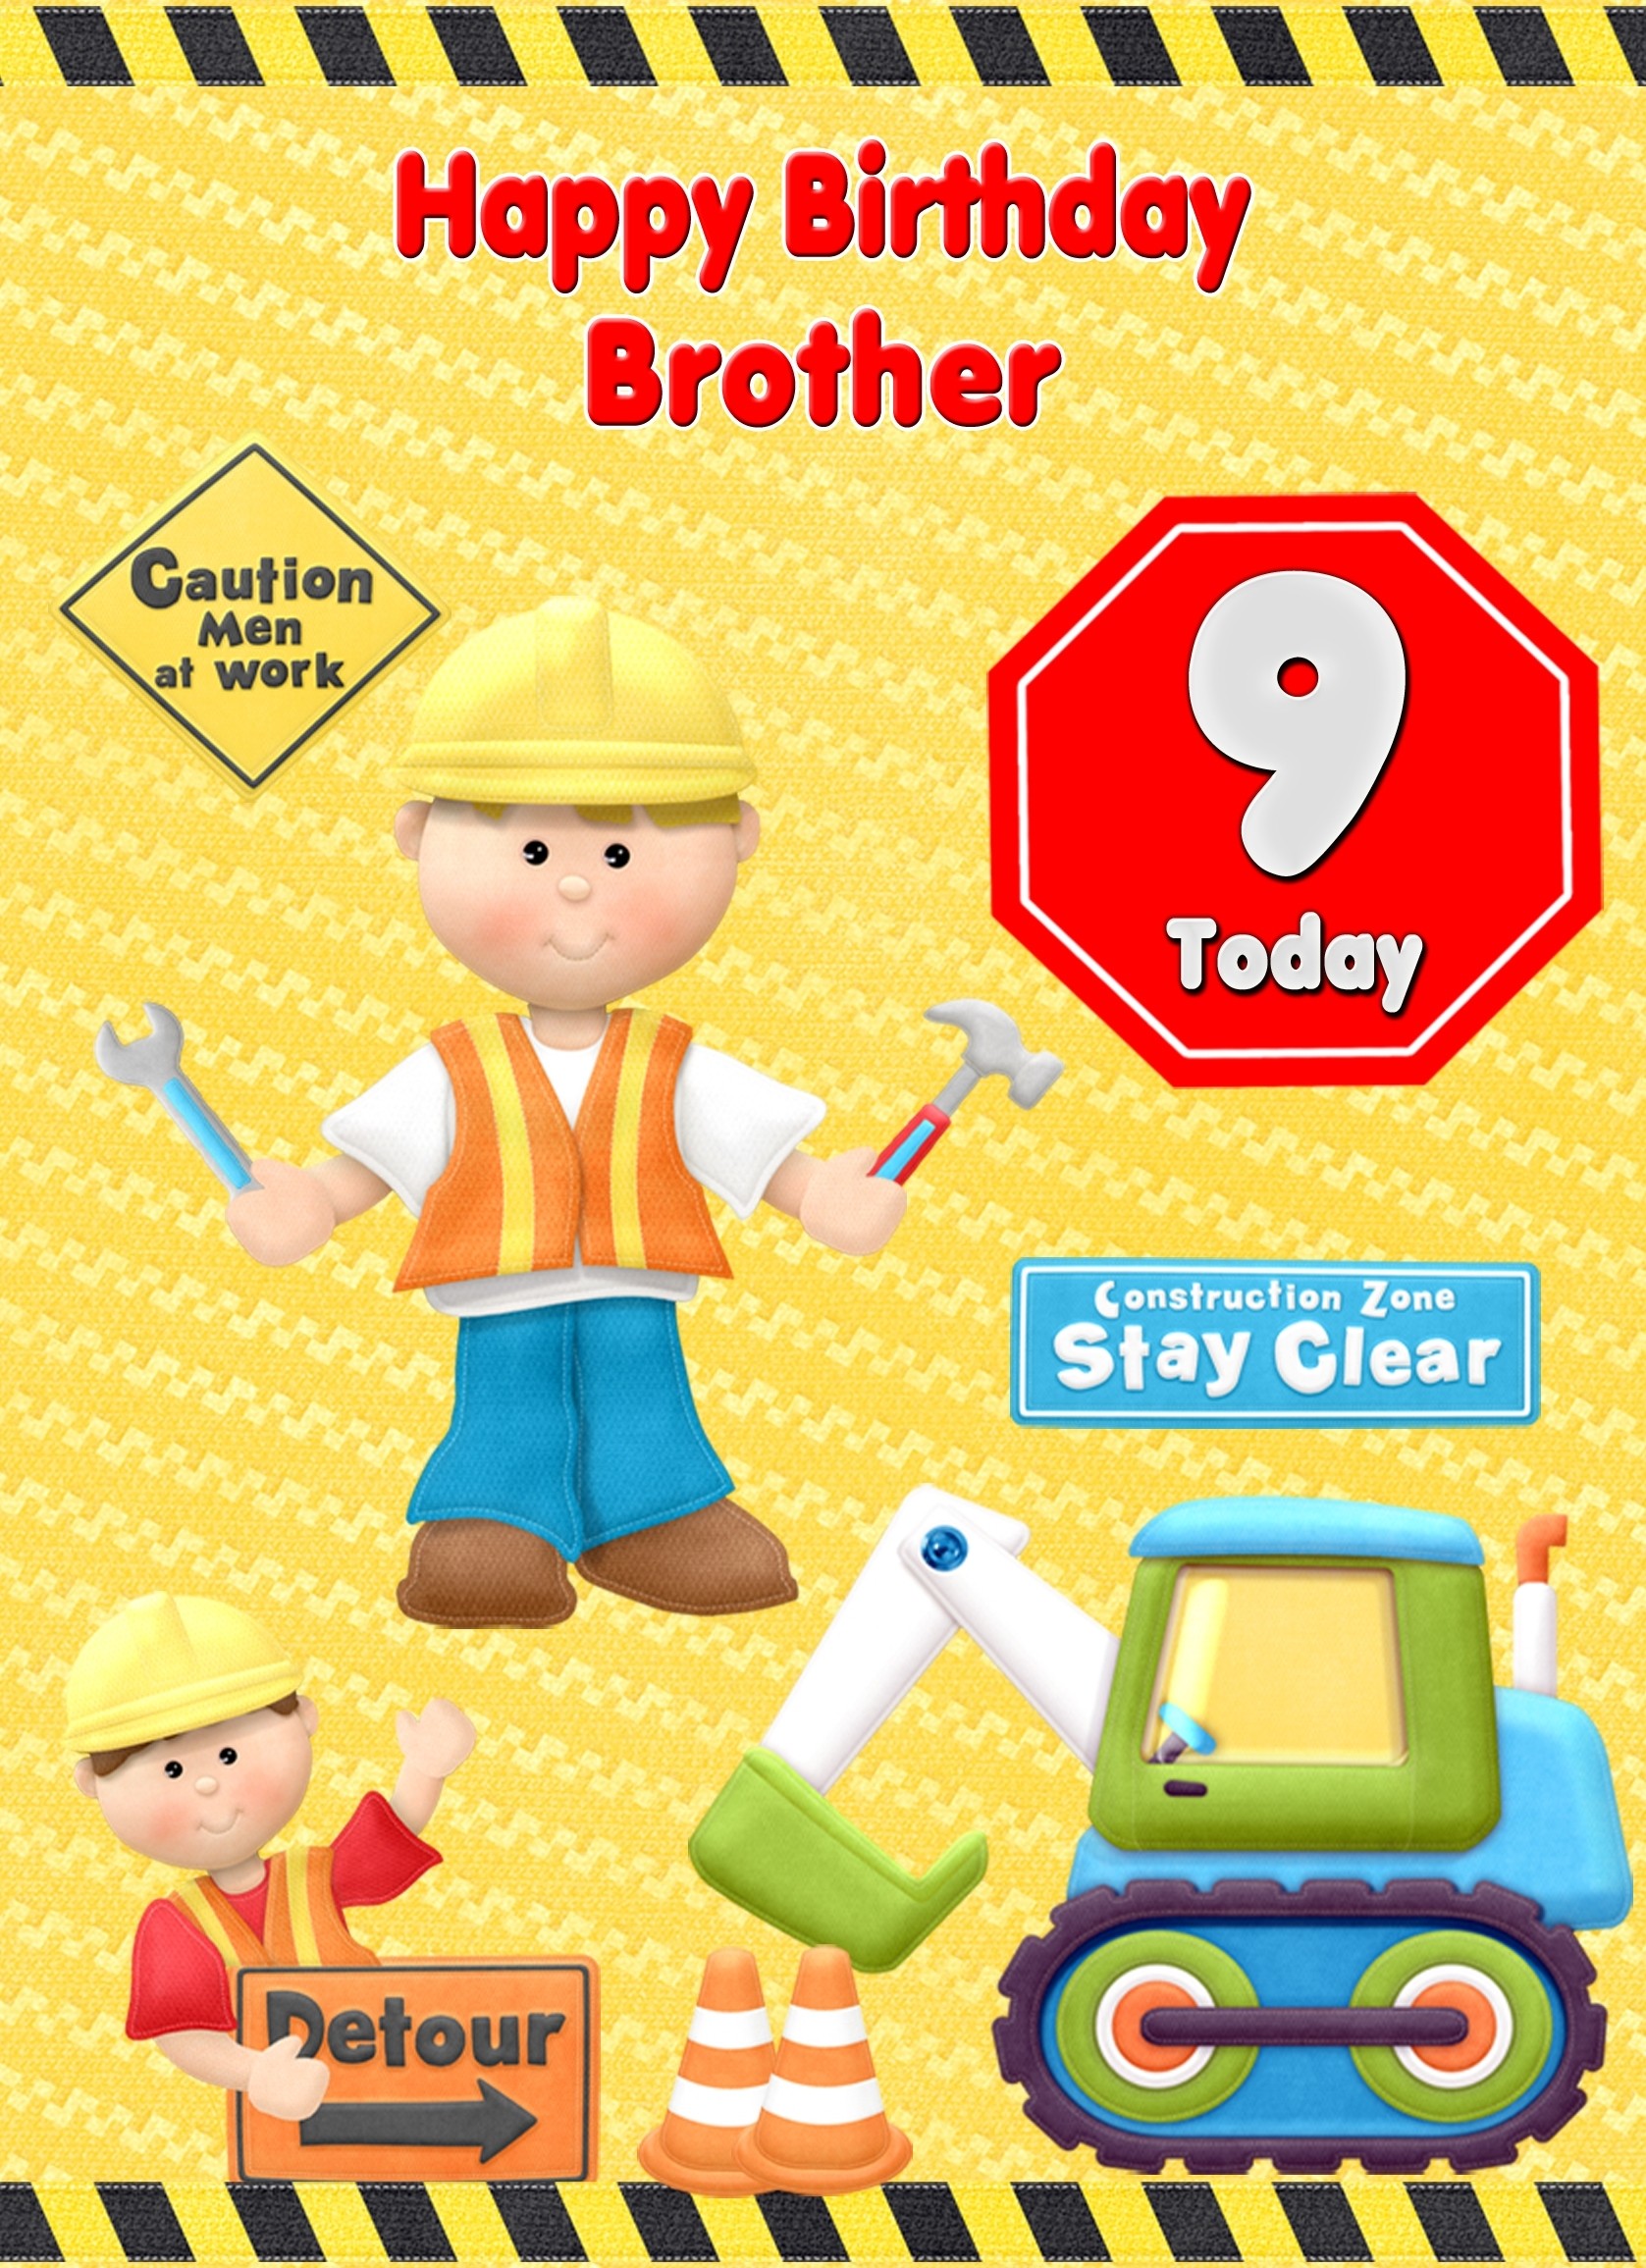 Kids 9th Birthday Builder Cartoon Card for Brother